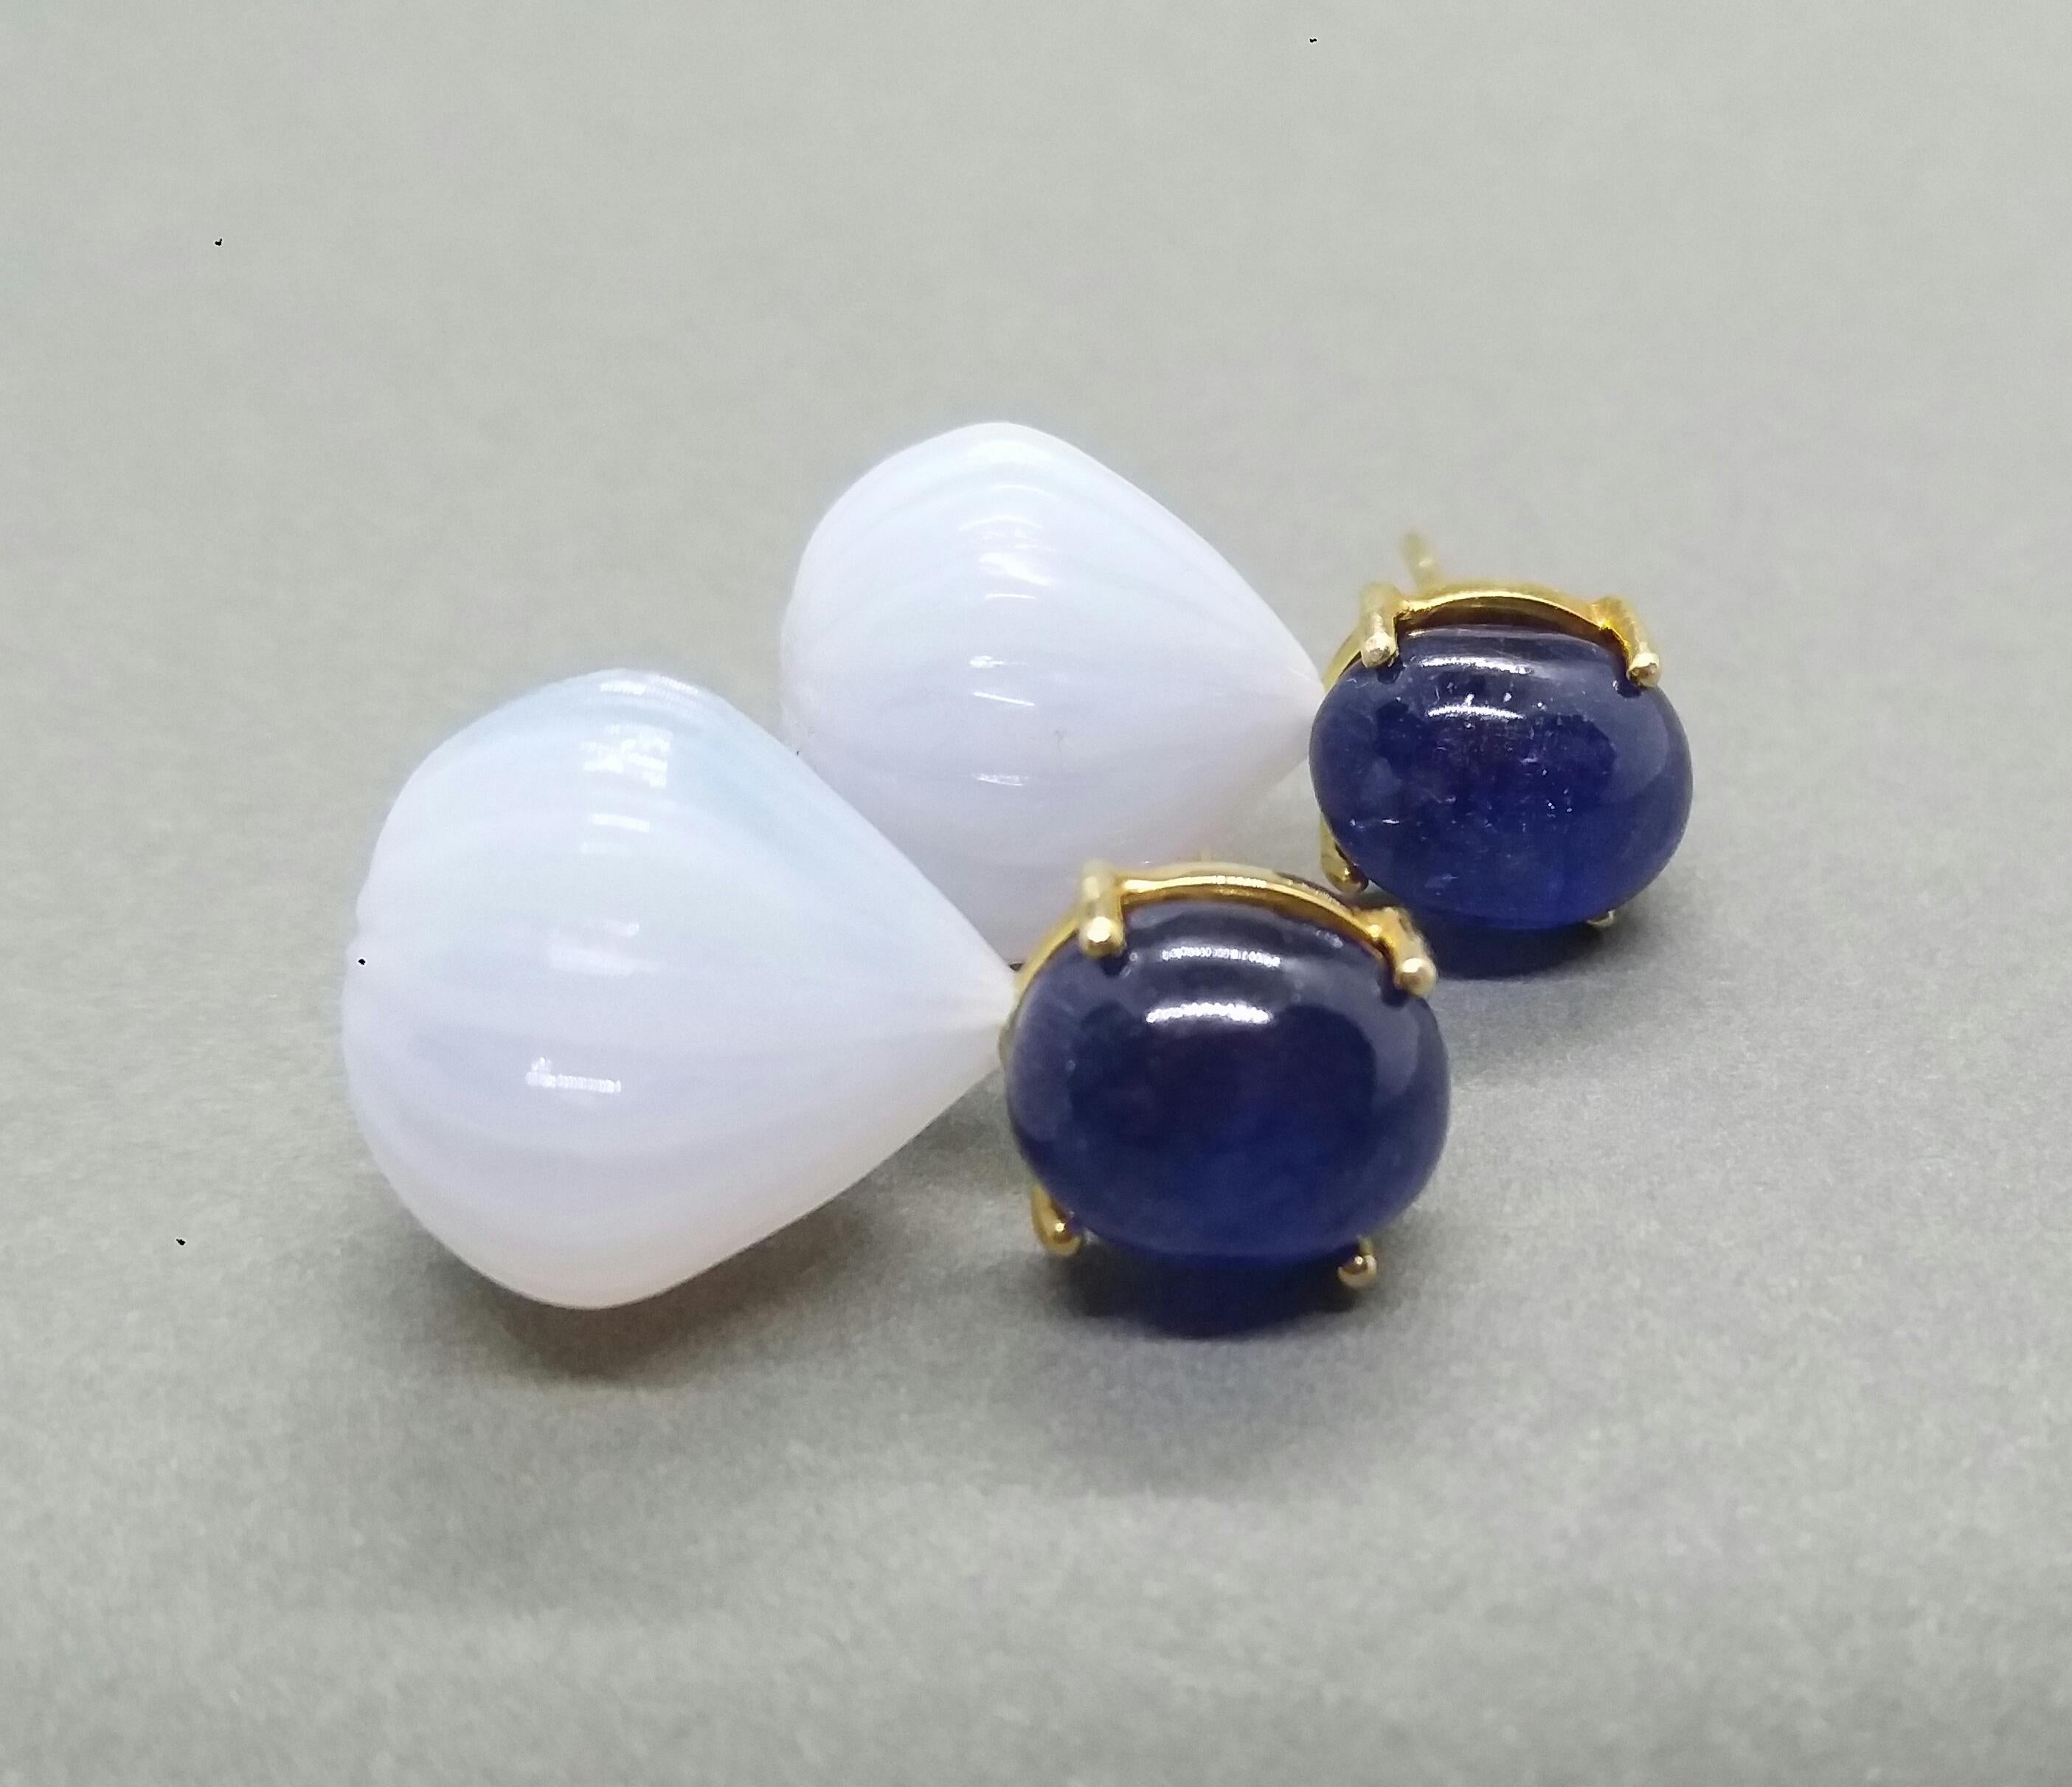 Simple chic stud earrings with a pair of Blue Sapphire  oval cabochon size 10 x 11 mm set in 14 kt solid yellow gold on the top and 2 Chalcedony carved round drops of  16 mm in diameter

In 1978 our workshop started in Italy to make simple-chic Art